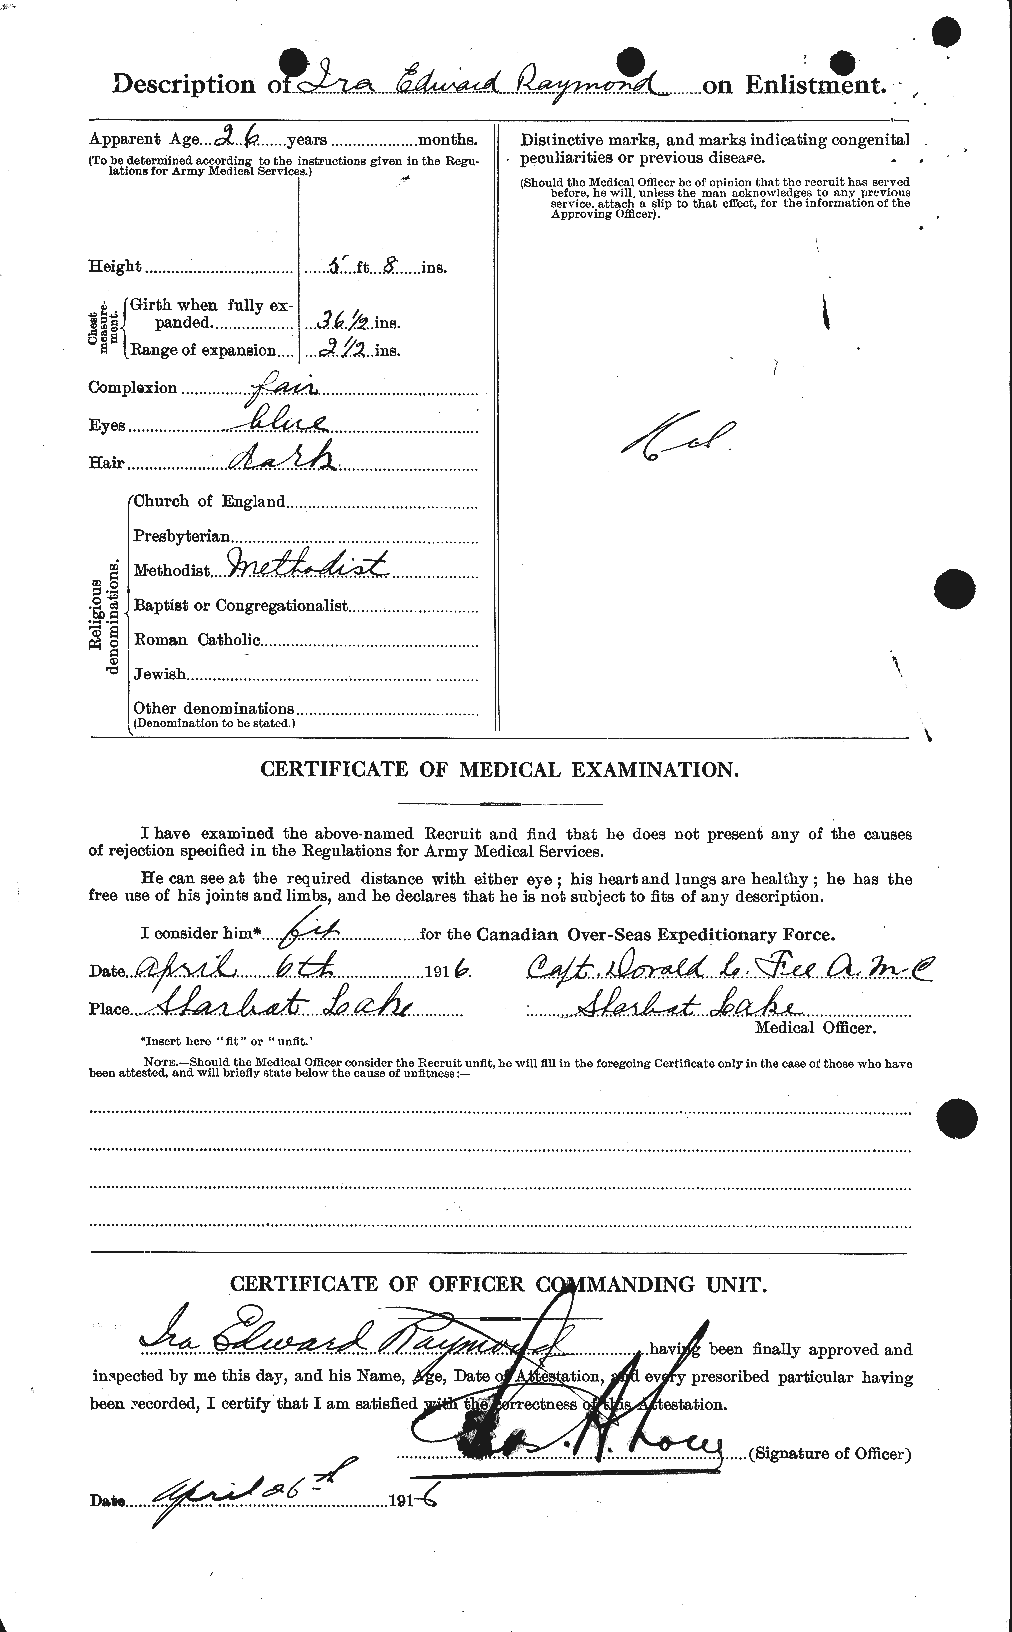 Personnel Records of the First World War - CEF 595361b